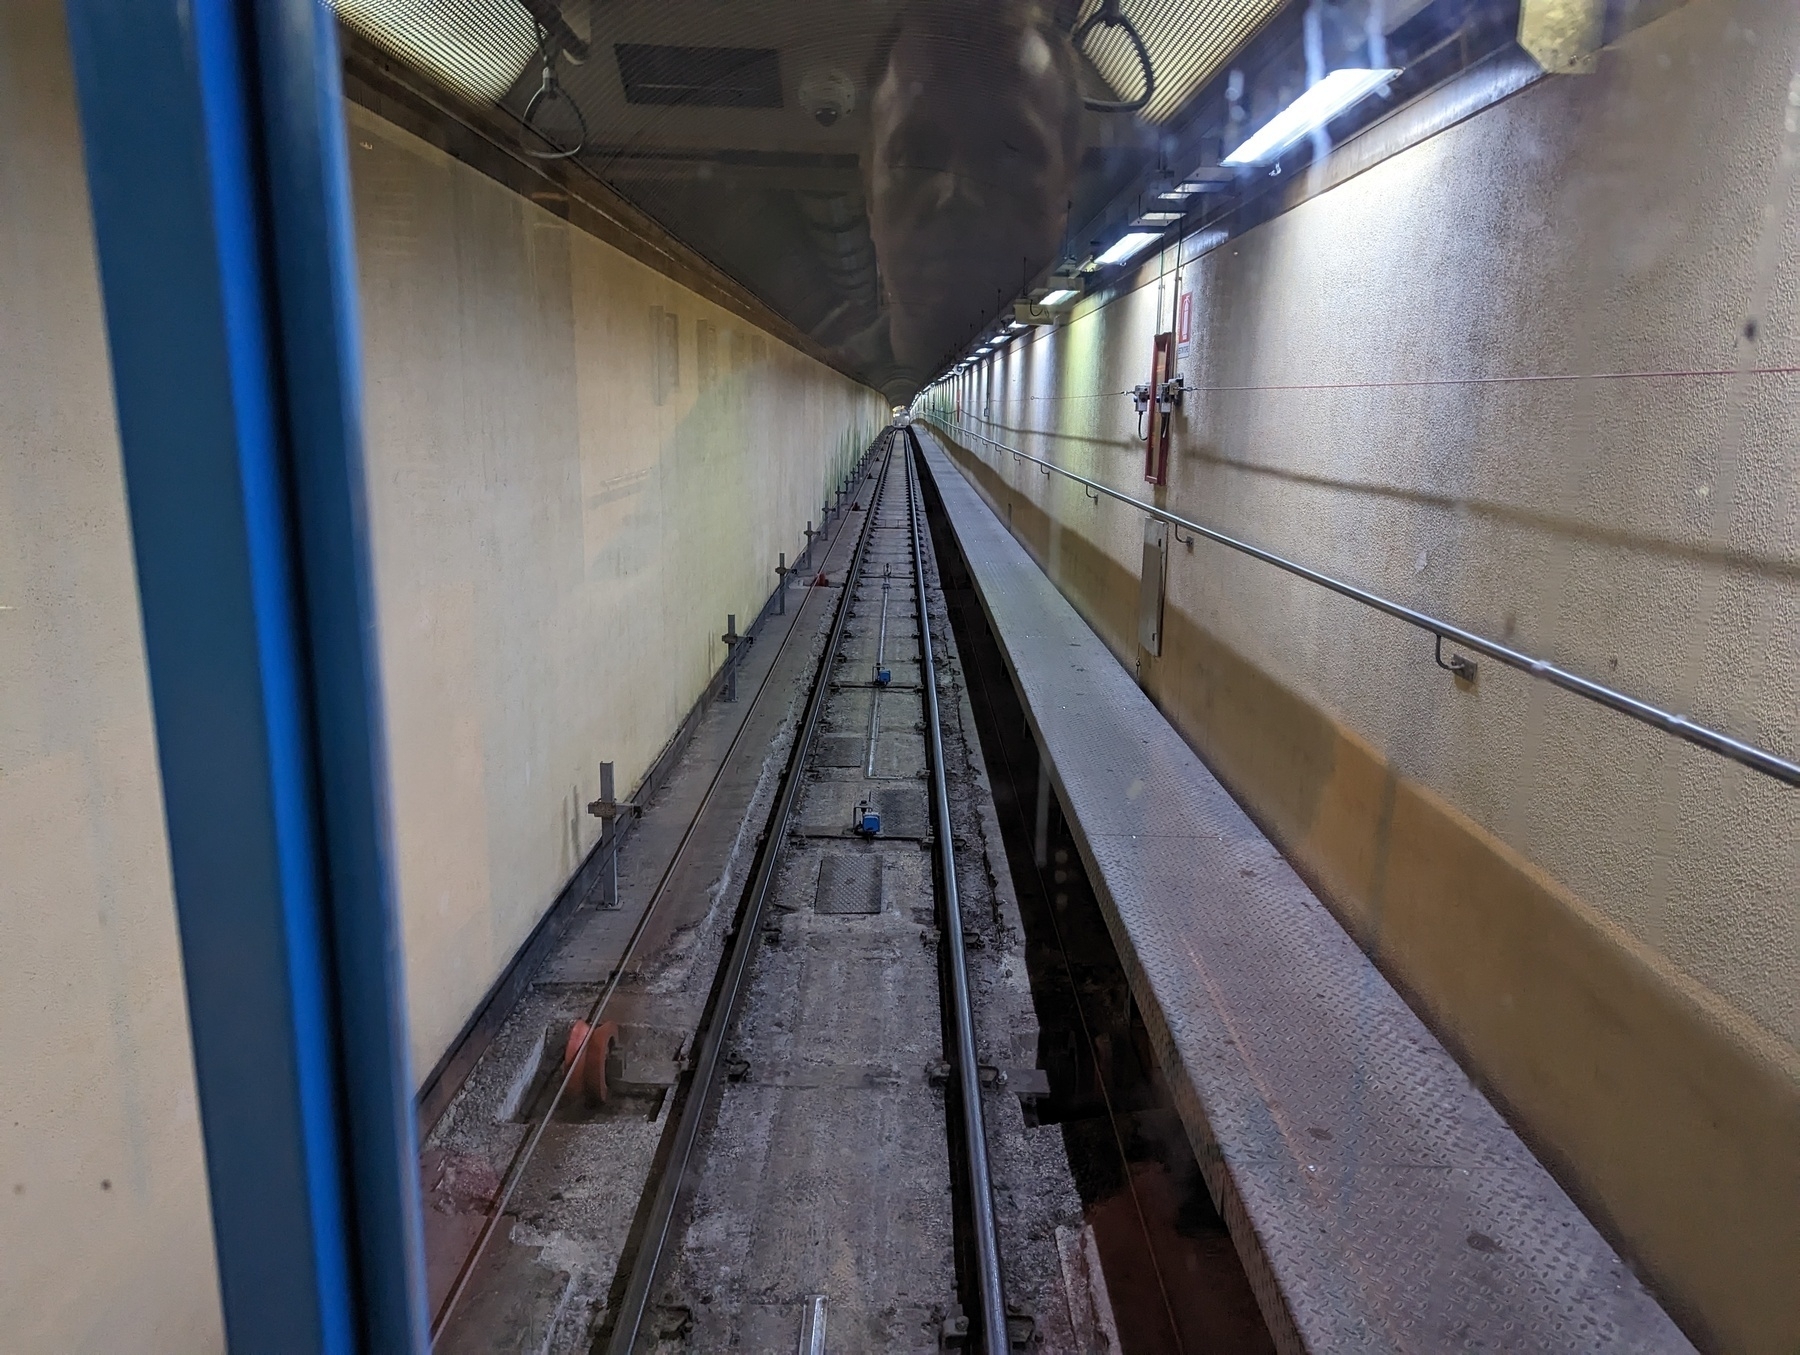 The horizontal section of the lift, which is a corridor with rails heading into the hill and fluorescent lights on the right wall.